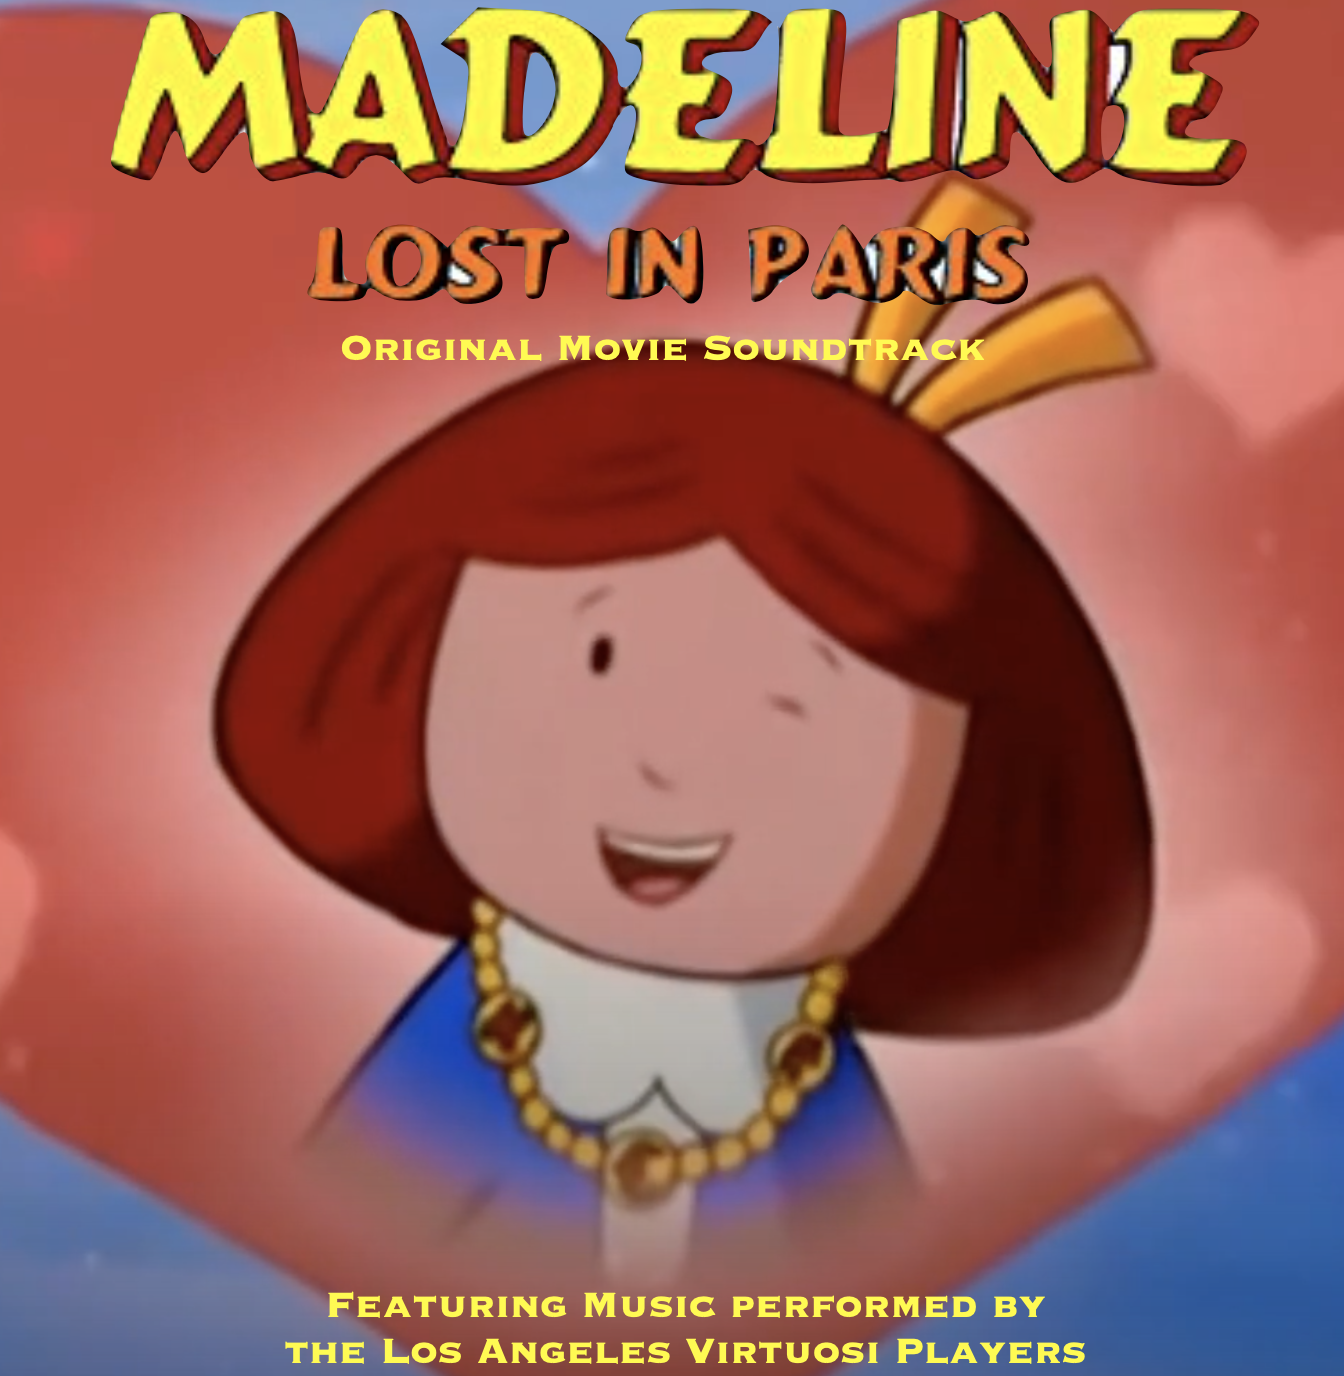 Madeline: Lost in Paris' Should Get an OST! by smochdar on DeviantArt